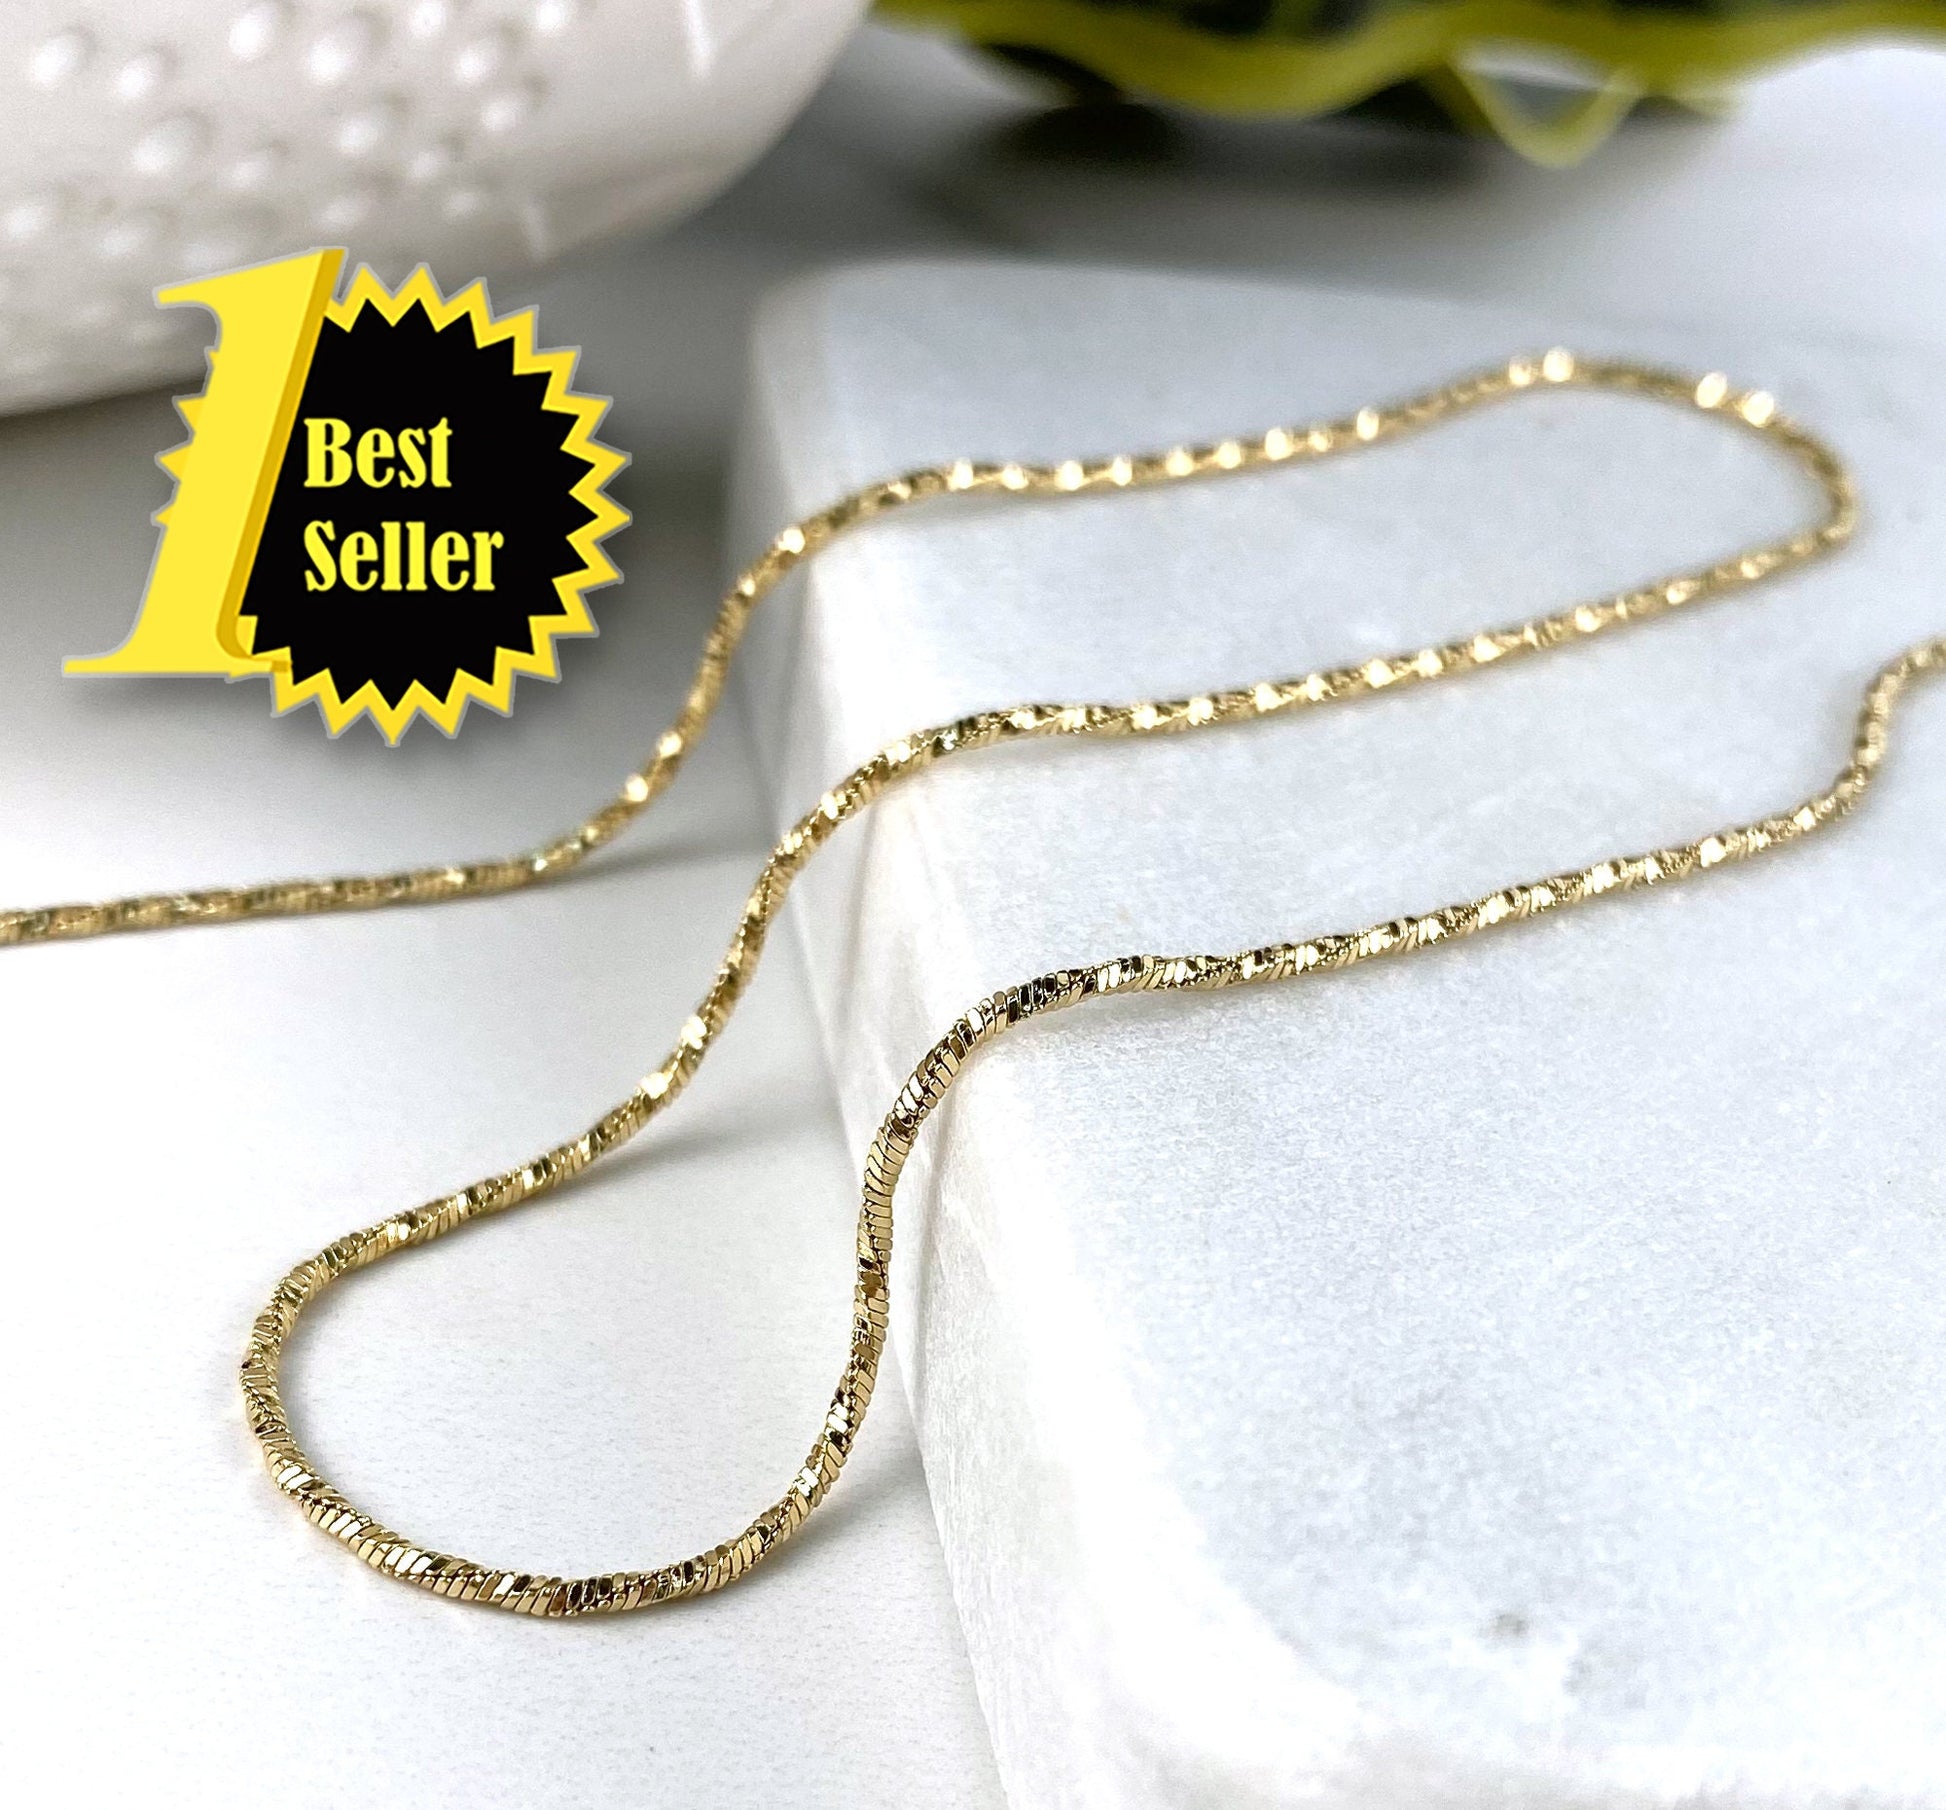 18k Gold Filled 1mm Thickness Fancy Diamond Cut Round Snake Chain Necklace for Wholesale Jewelry Making Supplies